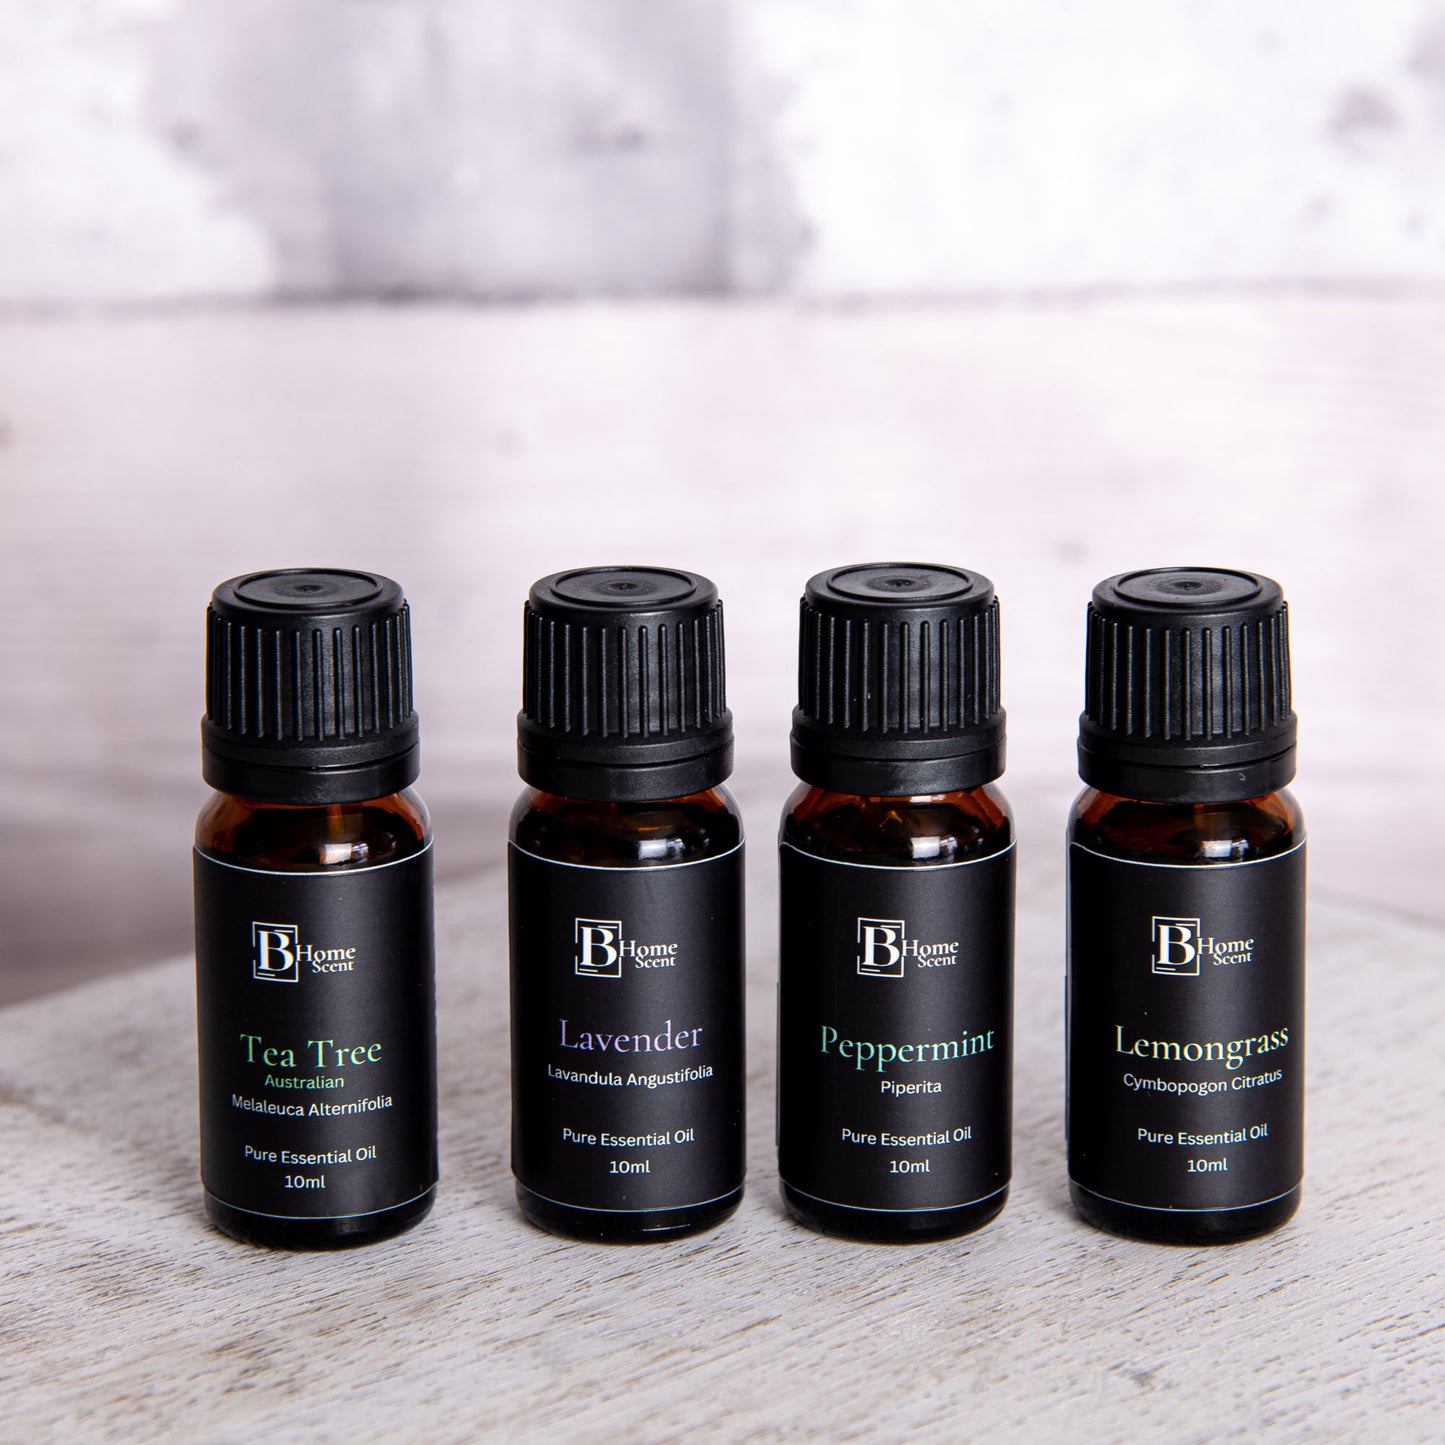 Essential Oil Set - 4 x 10ml - Lavender, Tea Tree, Lemongrass and Peppermint - 100% Pure Essential Oil - Essential Oils for Diffuser, Home, Aromatherapy